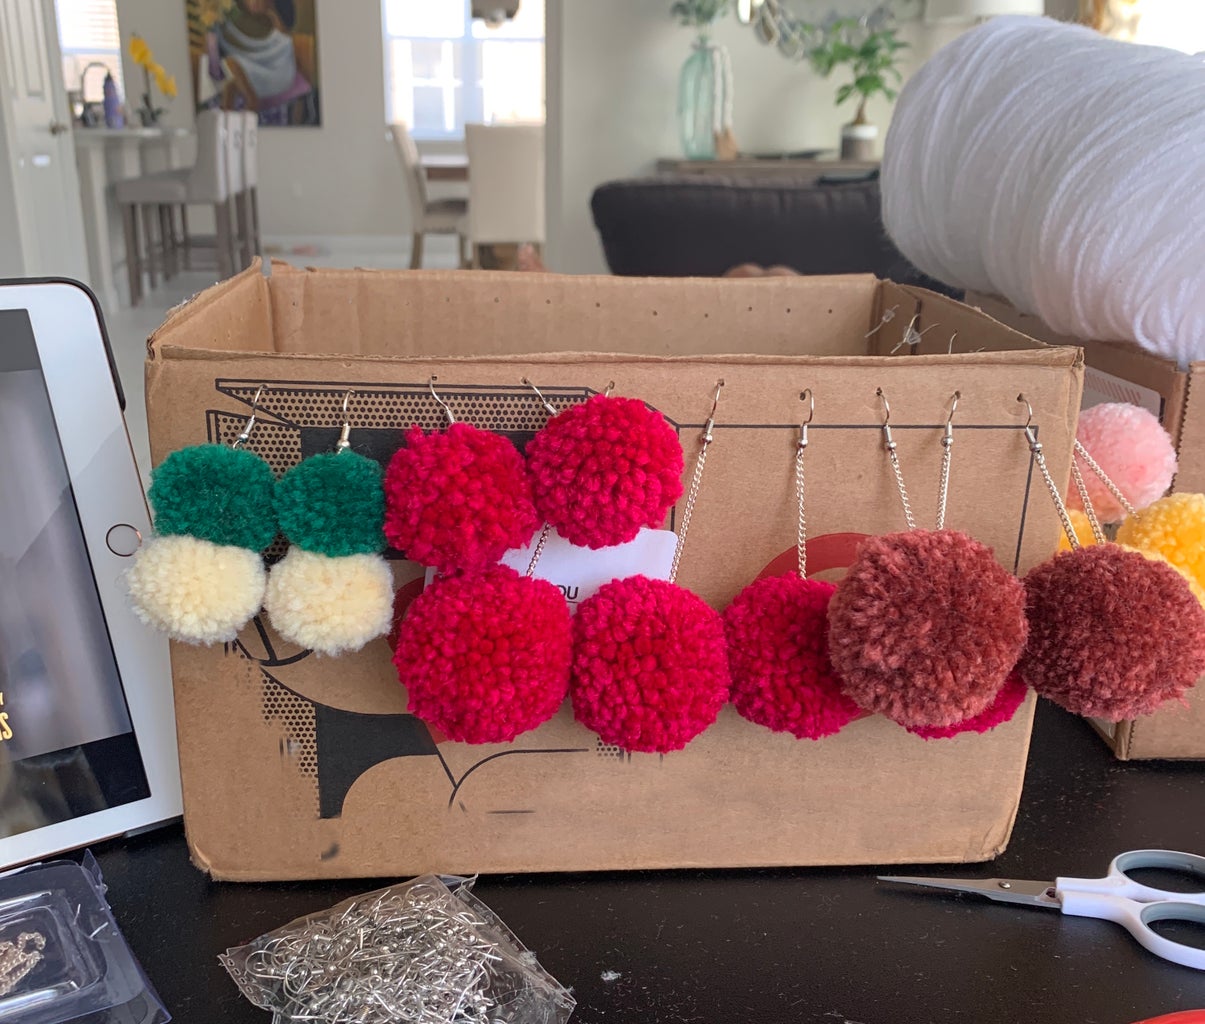 Variety of Pom-pom earrings dangling from a cardboard box